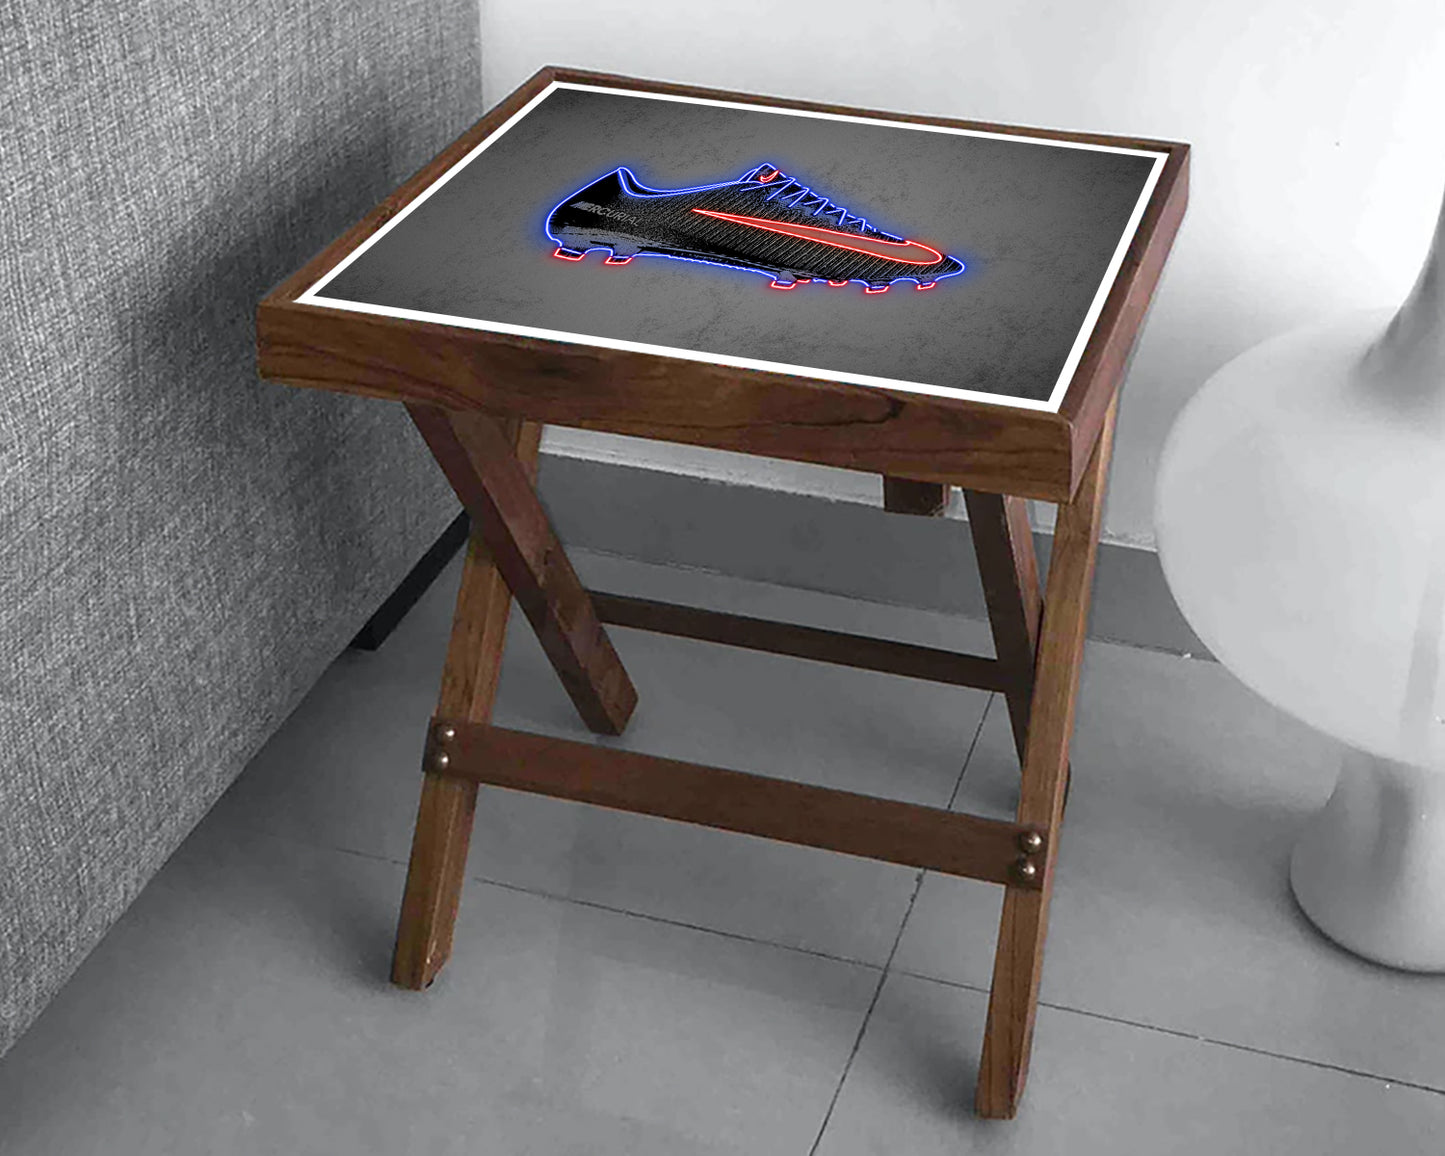 Football Shoes Neon Effect Coffee and Laptop Table 